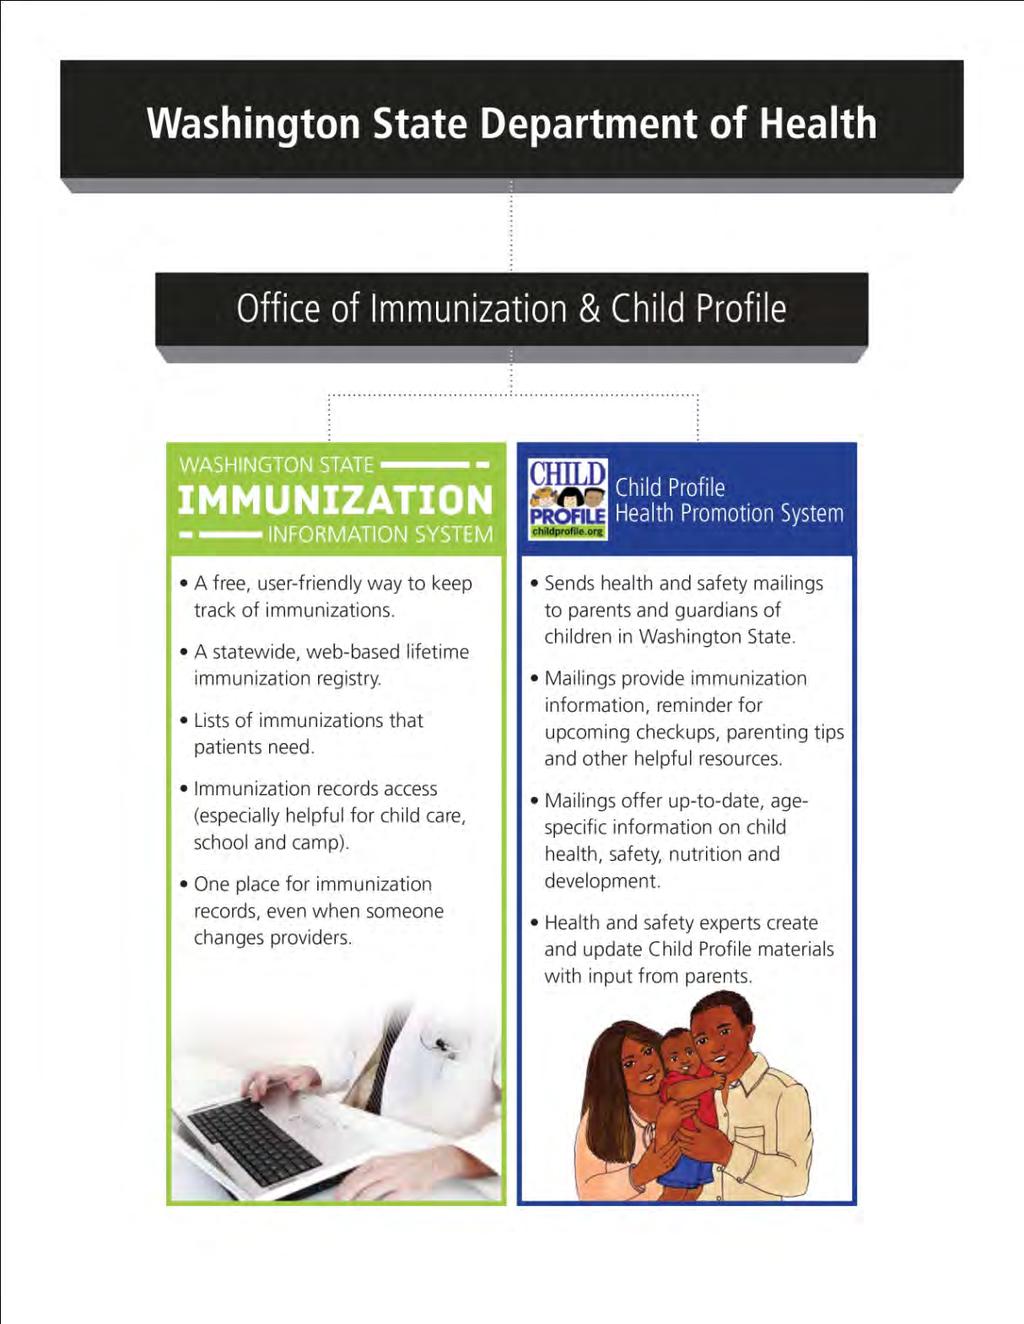 Washington State Immunization Information System Frequently Asked Questions about the Name Change more information about Child Profile Health Promotion at www.childprofile.org.